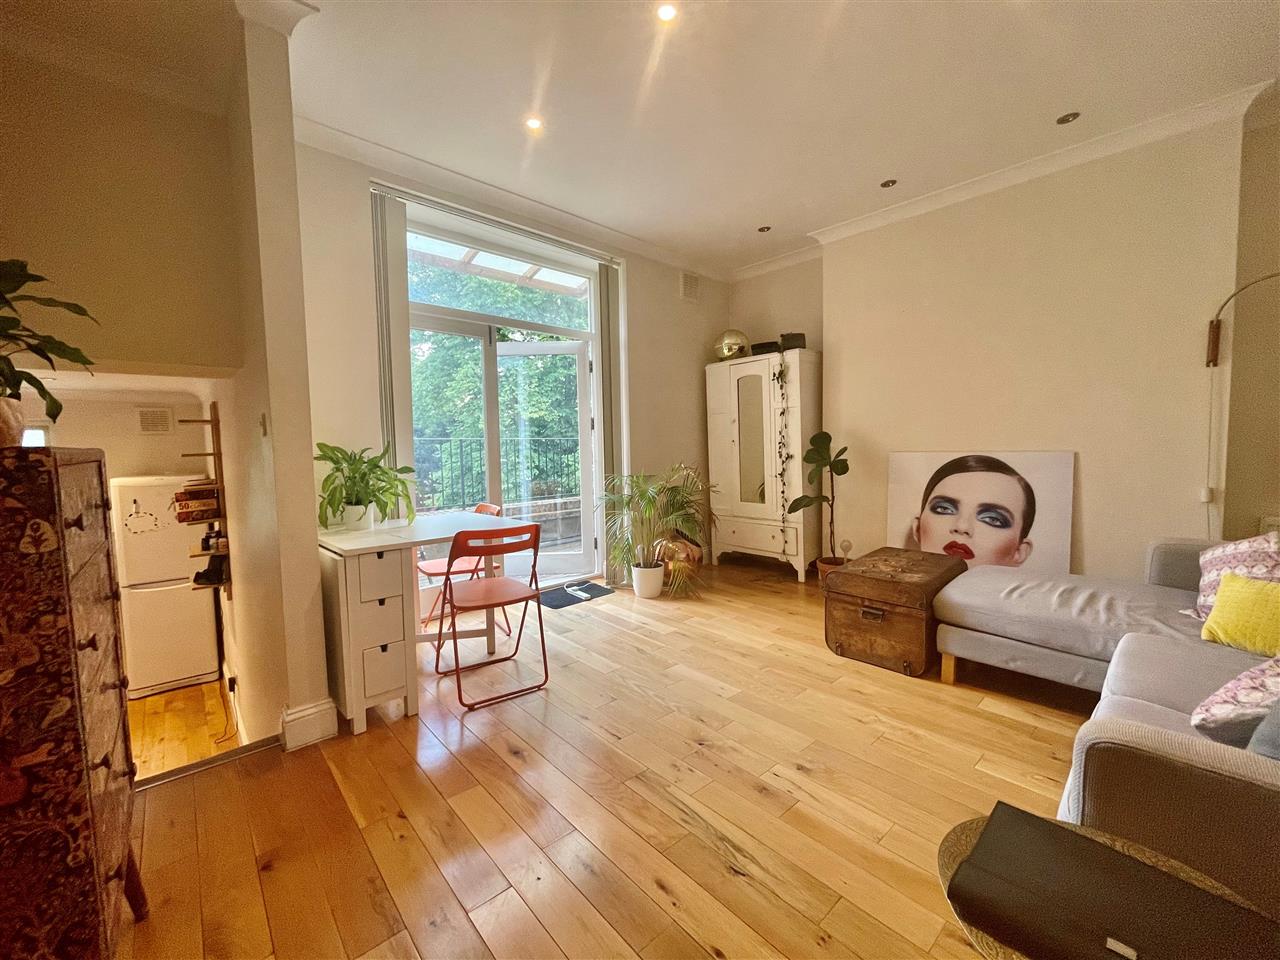 AVAILABLE 26th AUGUST 2023 to A MAXIMUM OF TWO NON-RELATED SHARERS OR A FAMILY. Forming part of a development of converted flats within a pair of semi detached period houses is this UNFURNISHED first floor SPLIT LEVEL 639 sq.ft apartment. The accommodation comprises of two double bedrooms, ...